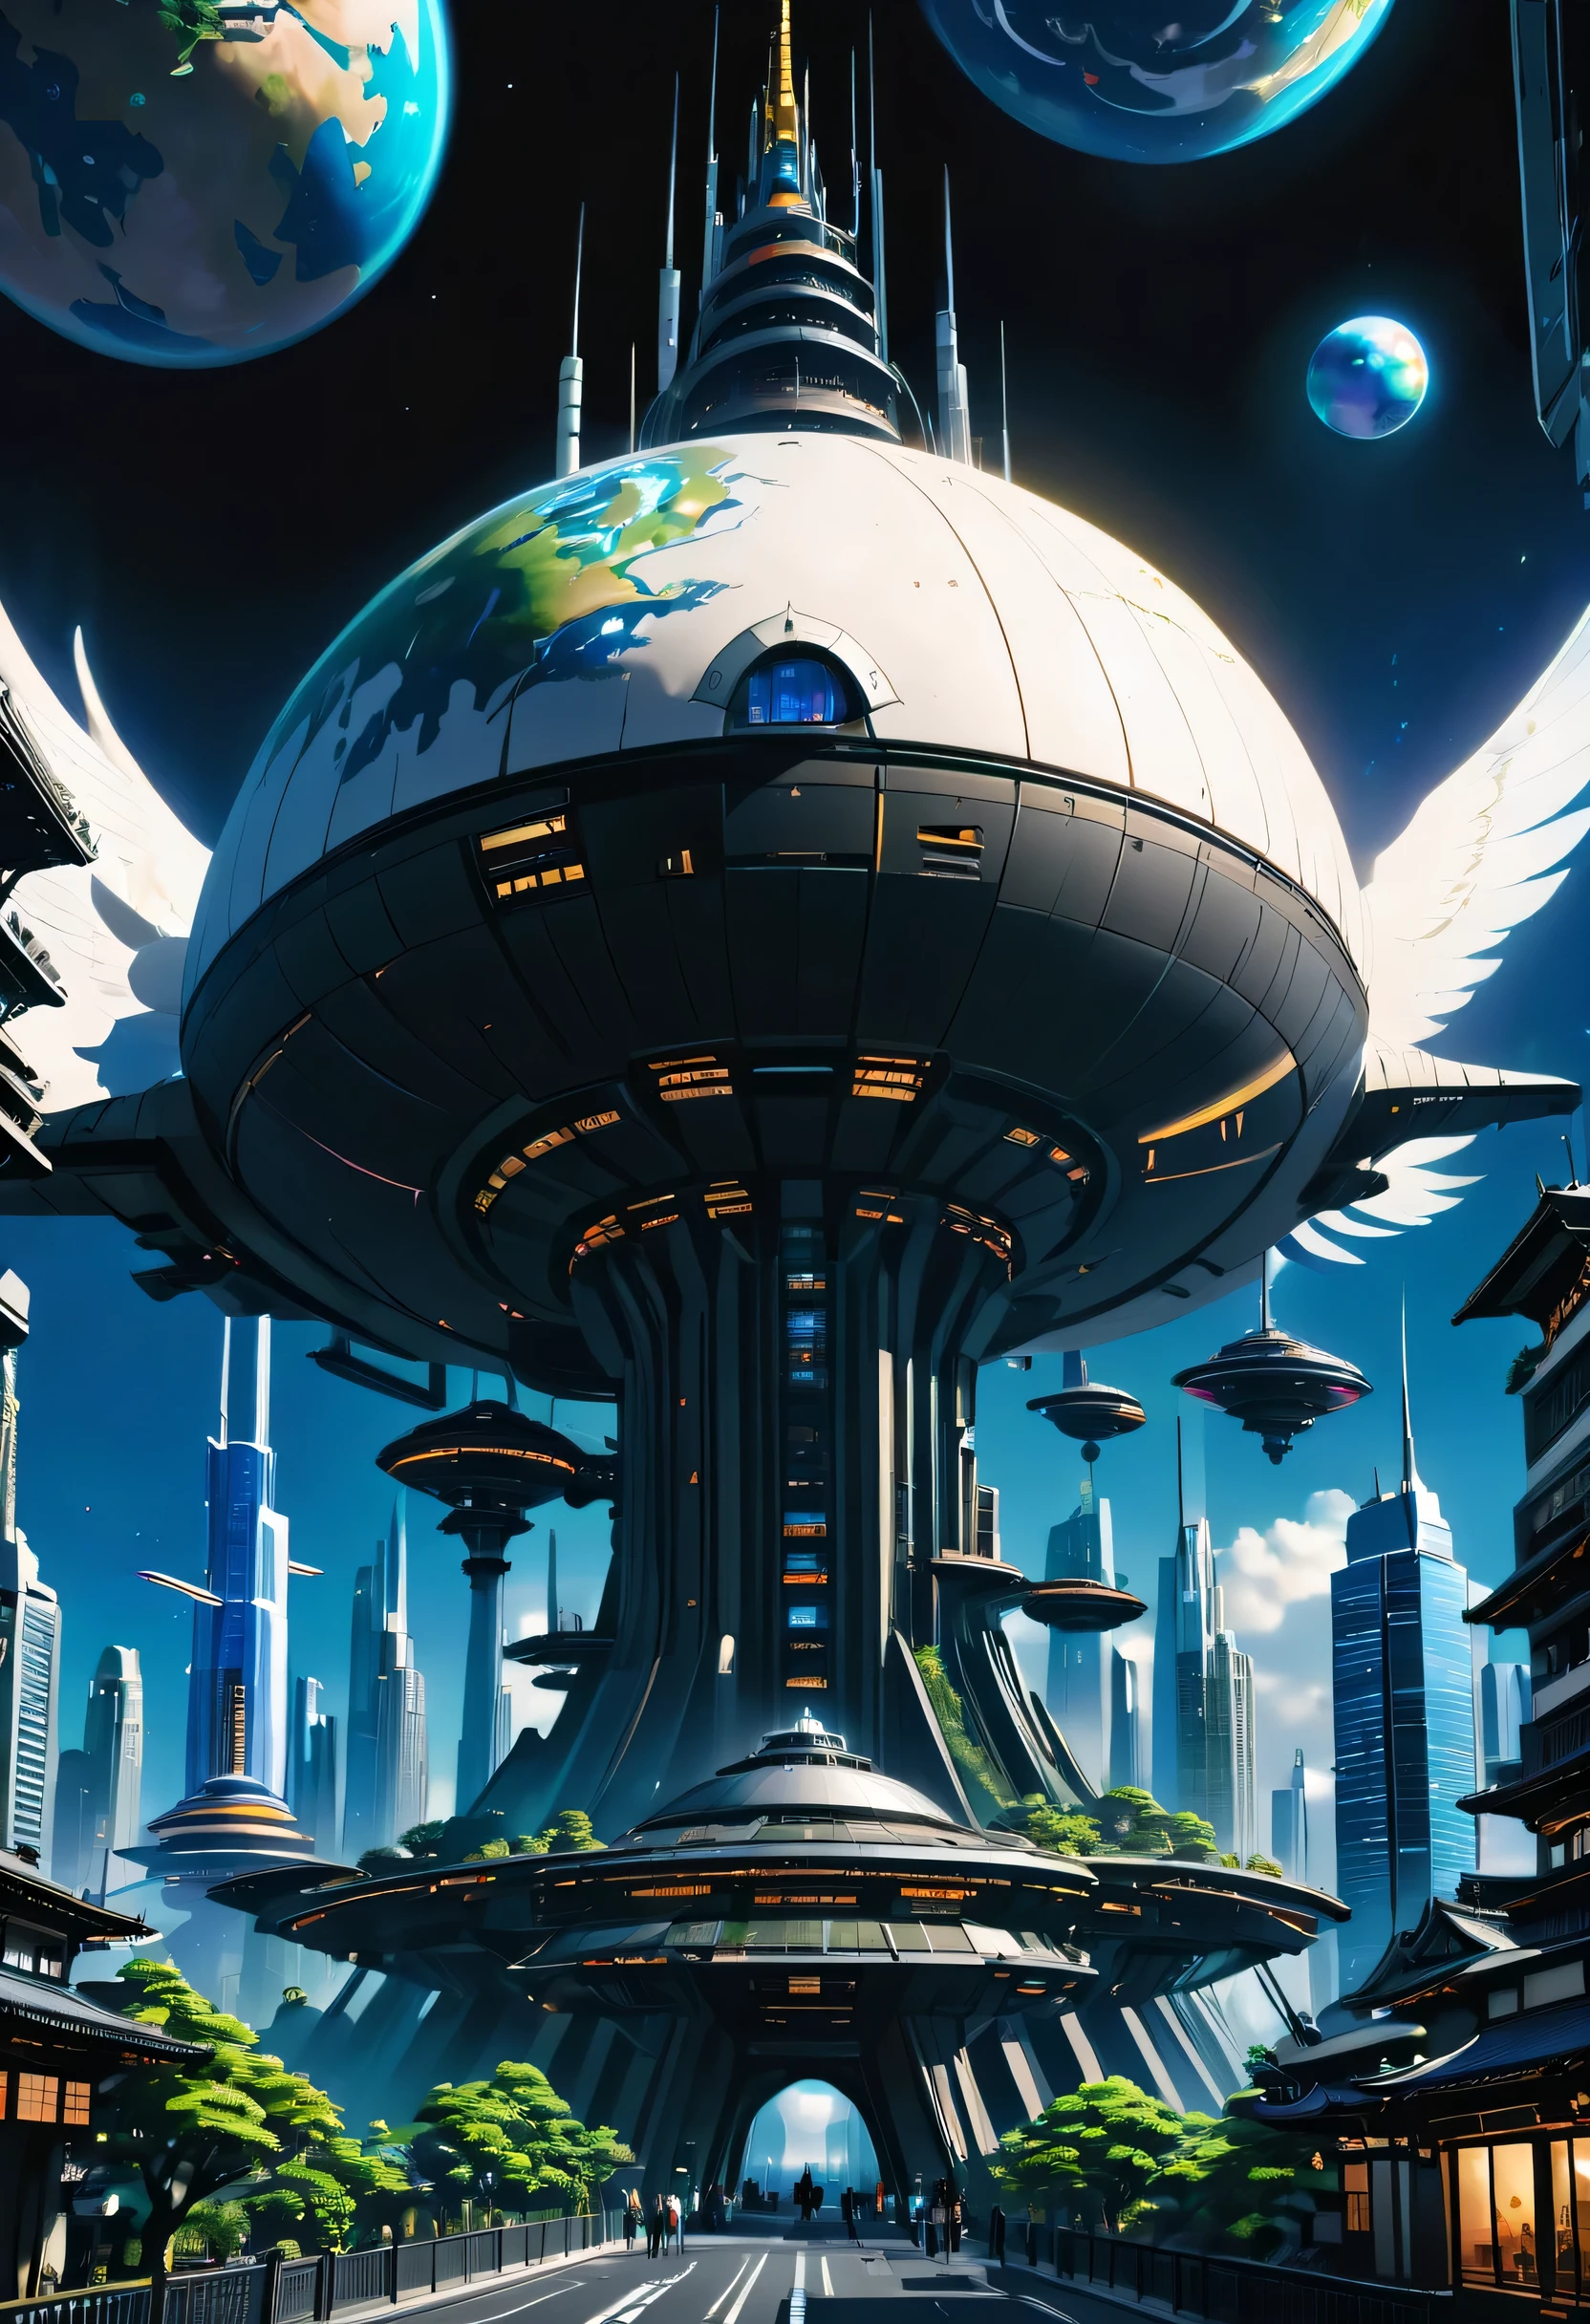 Space City、Futuristic cities、floating in the universe、cyberpunked、Skyscrapers line the streets、A space station、top-quality、​masterpiece、２４century、dream、utopian、planet earth、World of Dreams、Fantasia、𝓡𝓸𝓶𝓪𝓷𝓽𝓲𝓬、Super huge waterfall、ＳＦart by、Super huge structure、